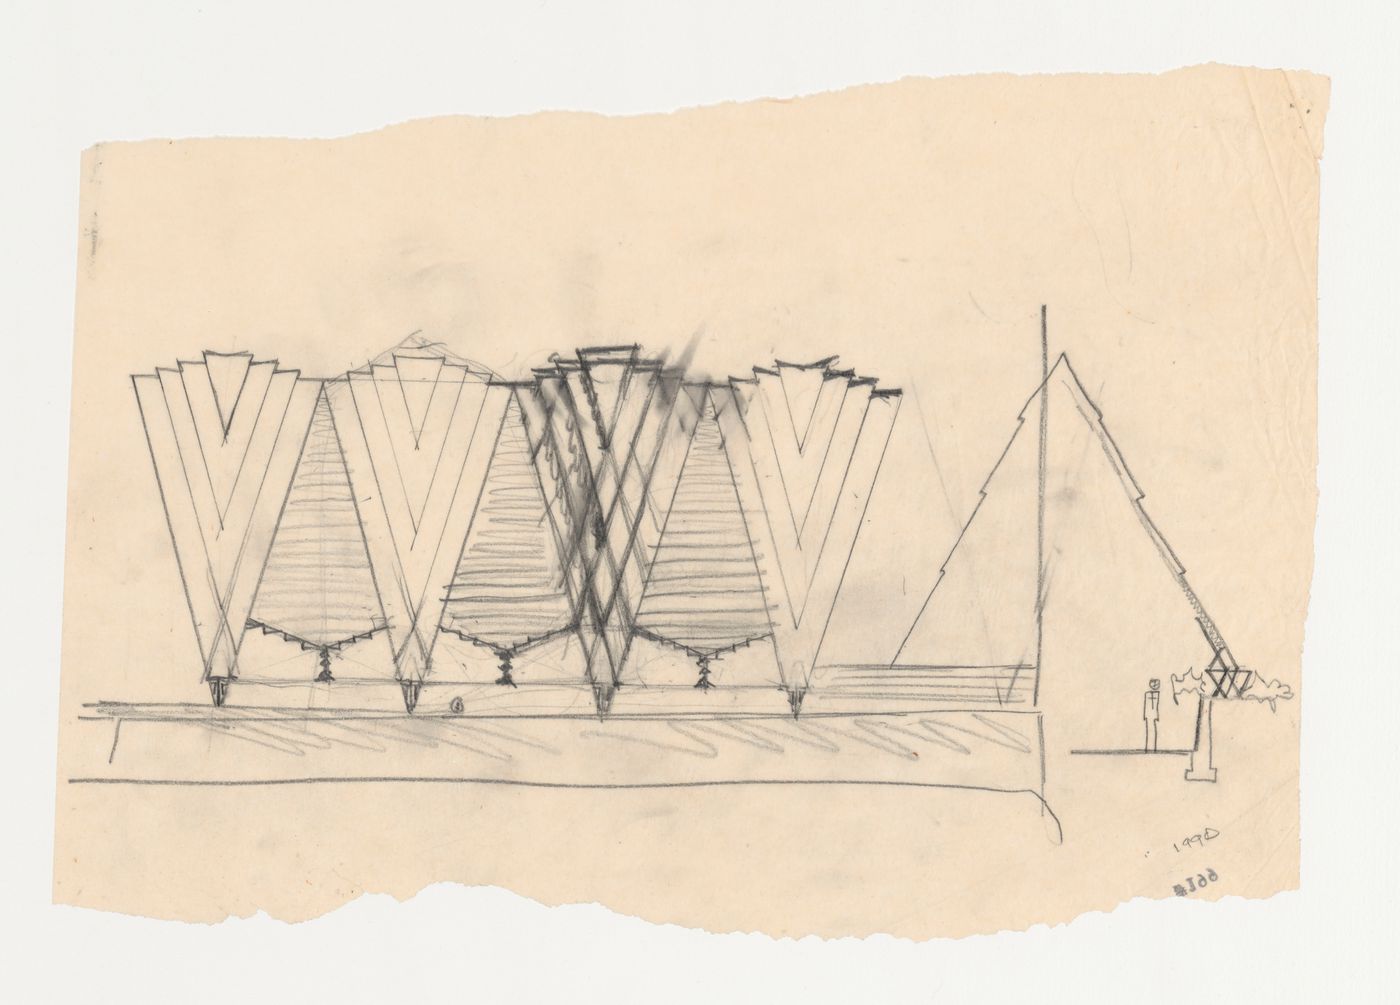 Sketch elevation and section for a chapel roof canopy based on the Wayfarers' Chapel design